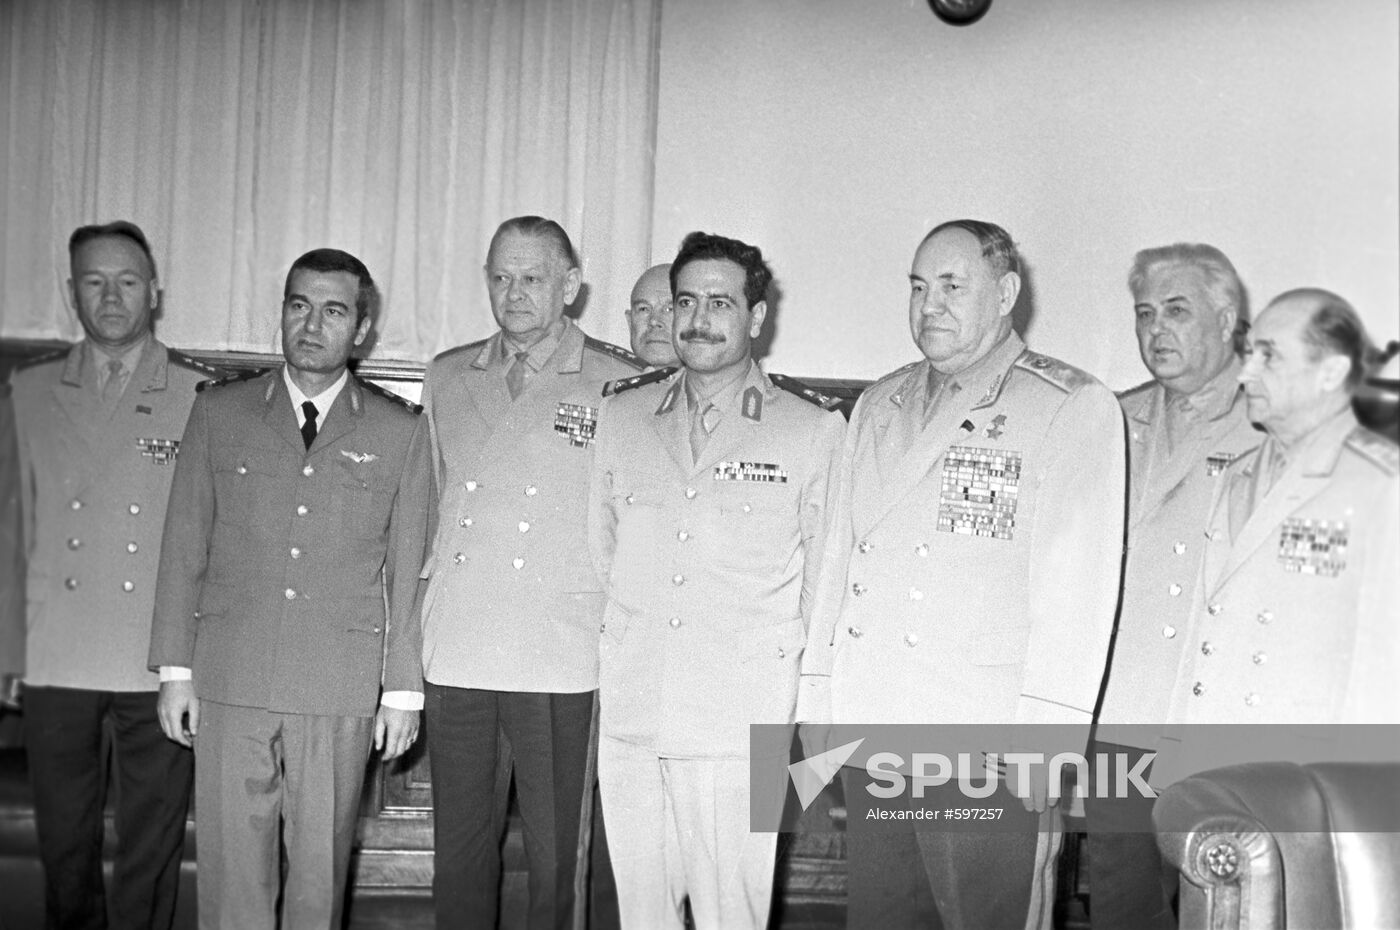 Syrian military delegation in the USSR